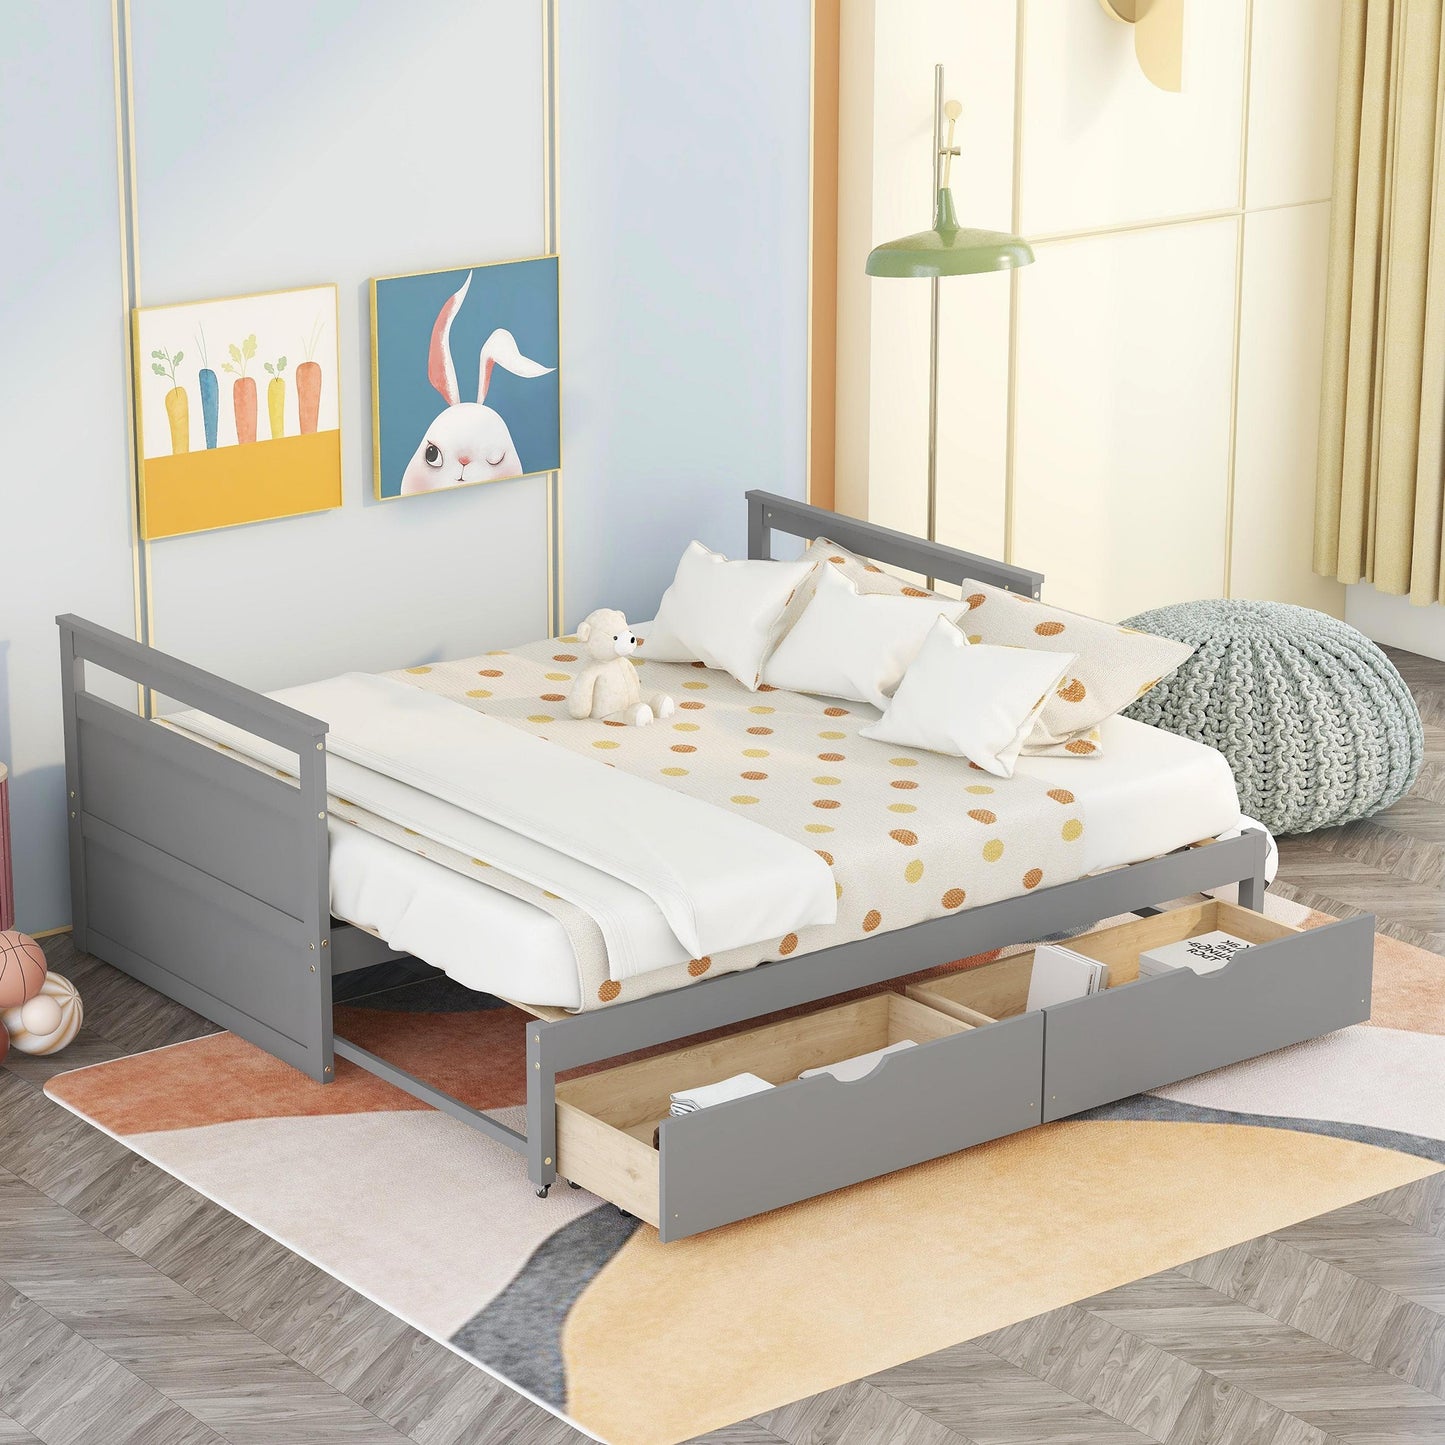 THE TWIN BED CAN BE EXPANDED WITH 2 DRAWERS